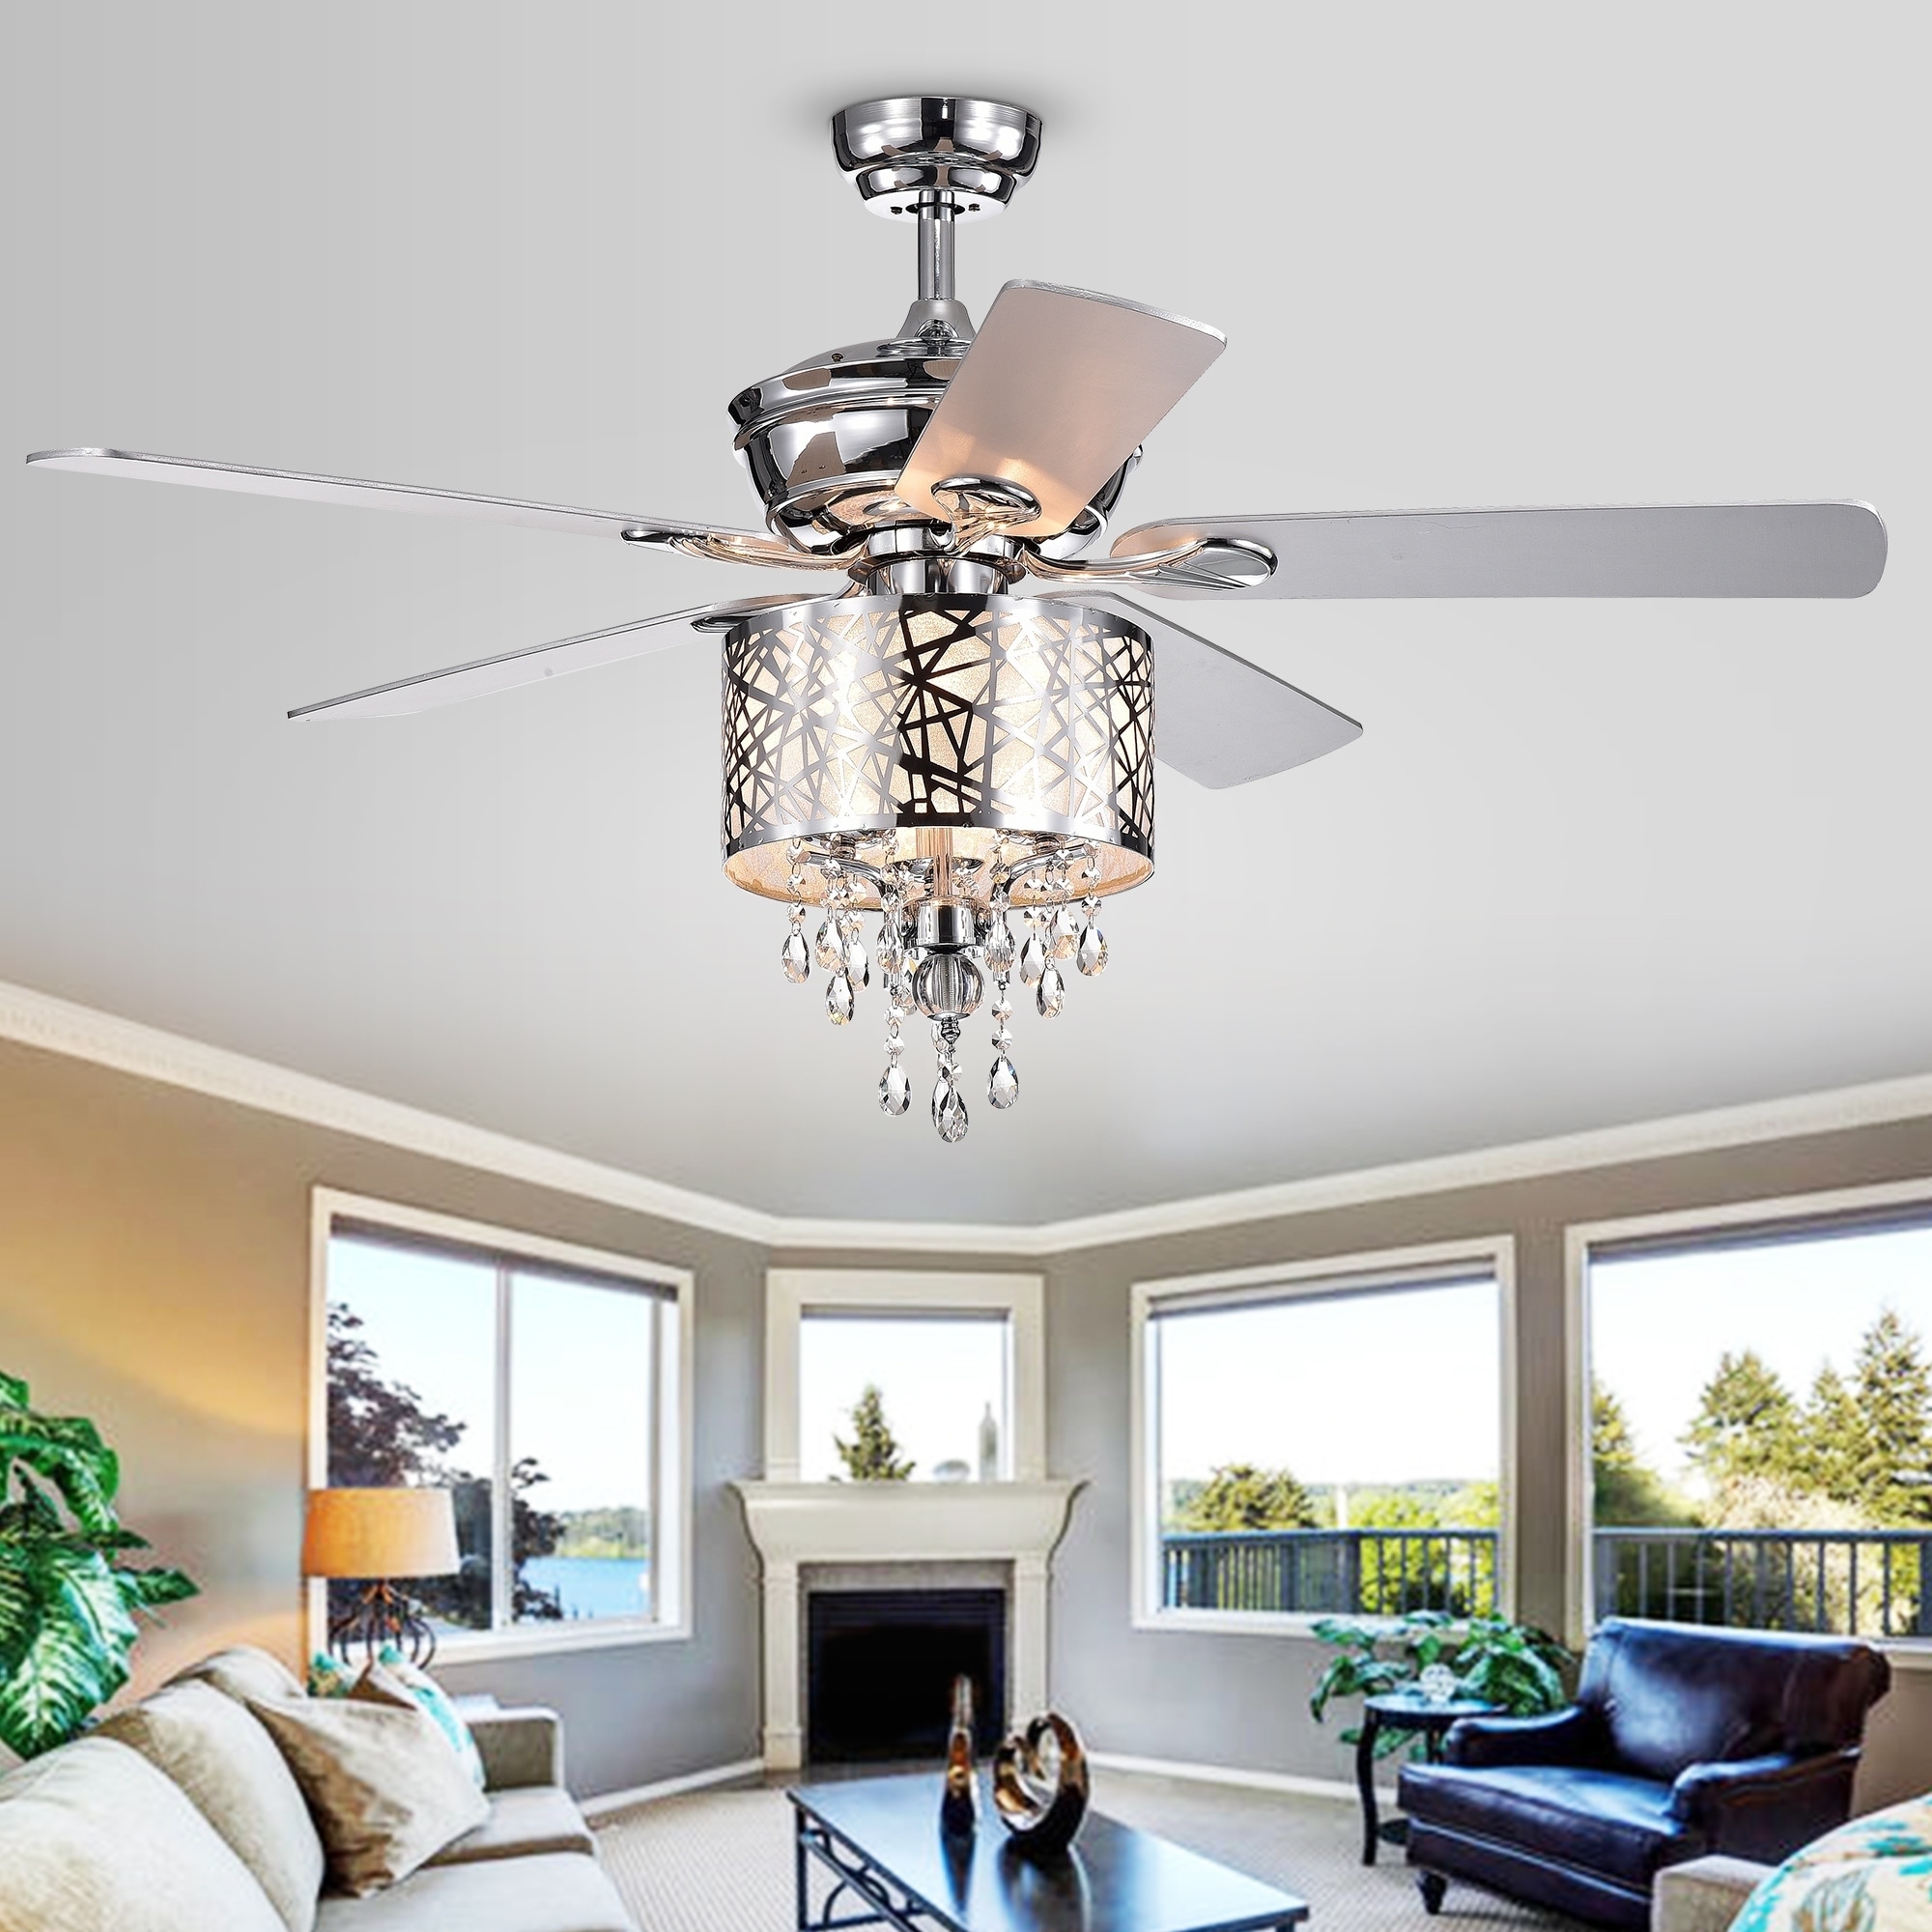 Garvey 5 Blade 52 Inch Chrome Ceiling Fan With 3 Light Crystal Chandelier Remote Controlled